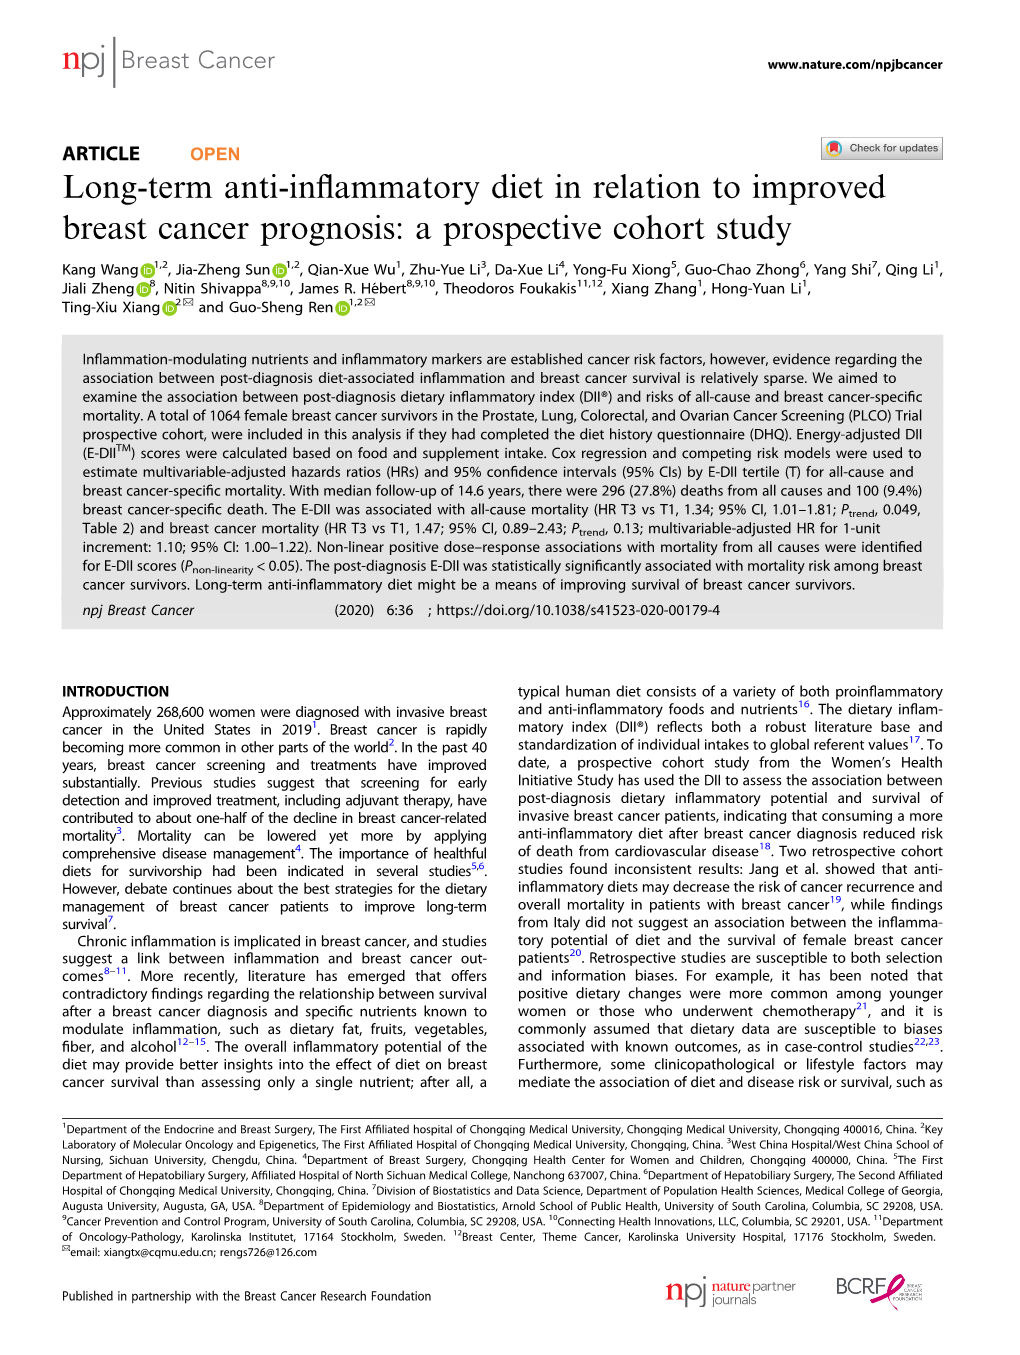 Long-Term Anti-Inflammatory Diet in Relation to Improved Breast Cancer Prognosis